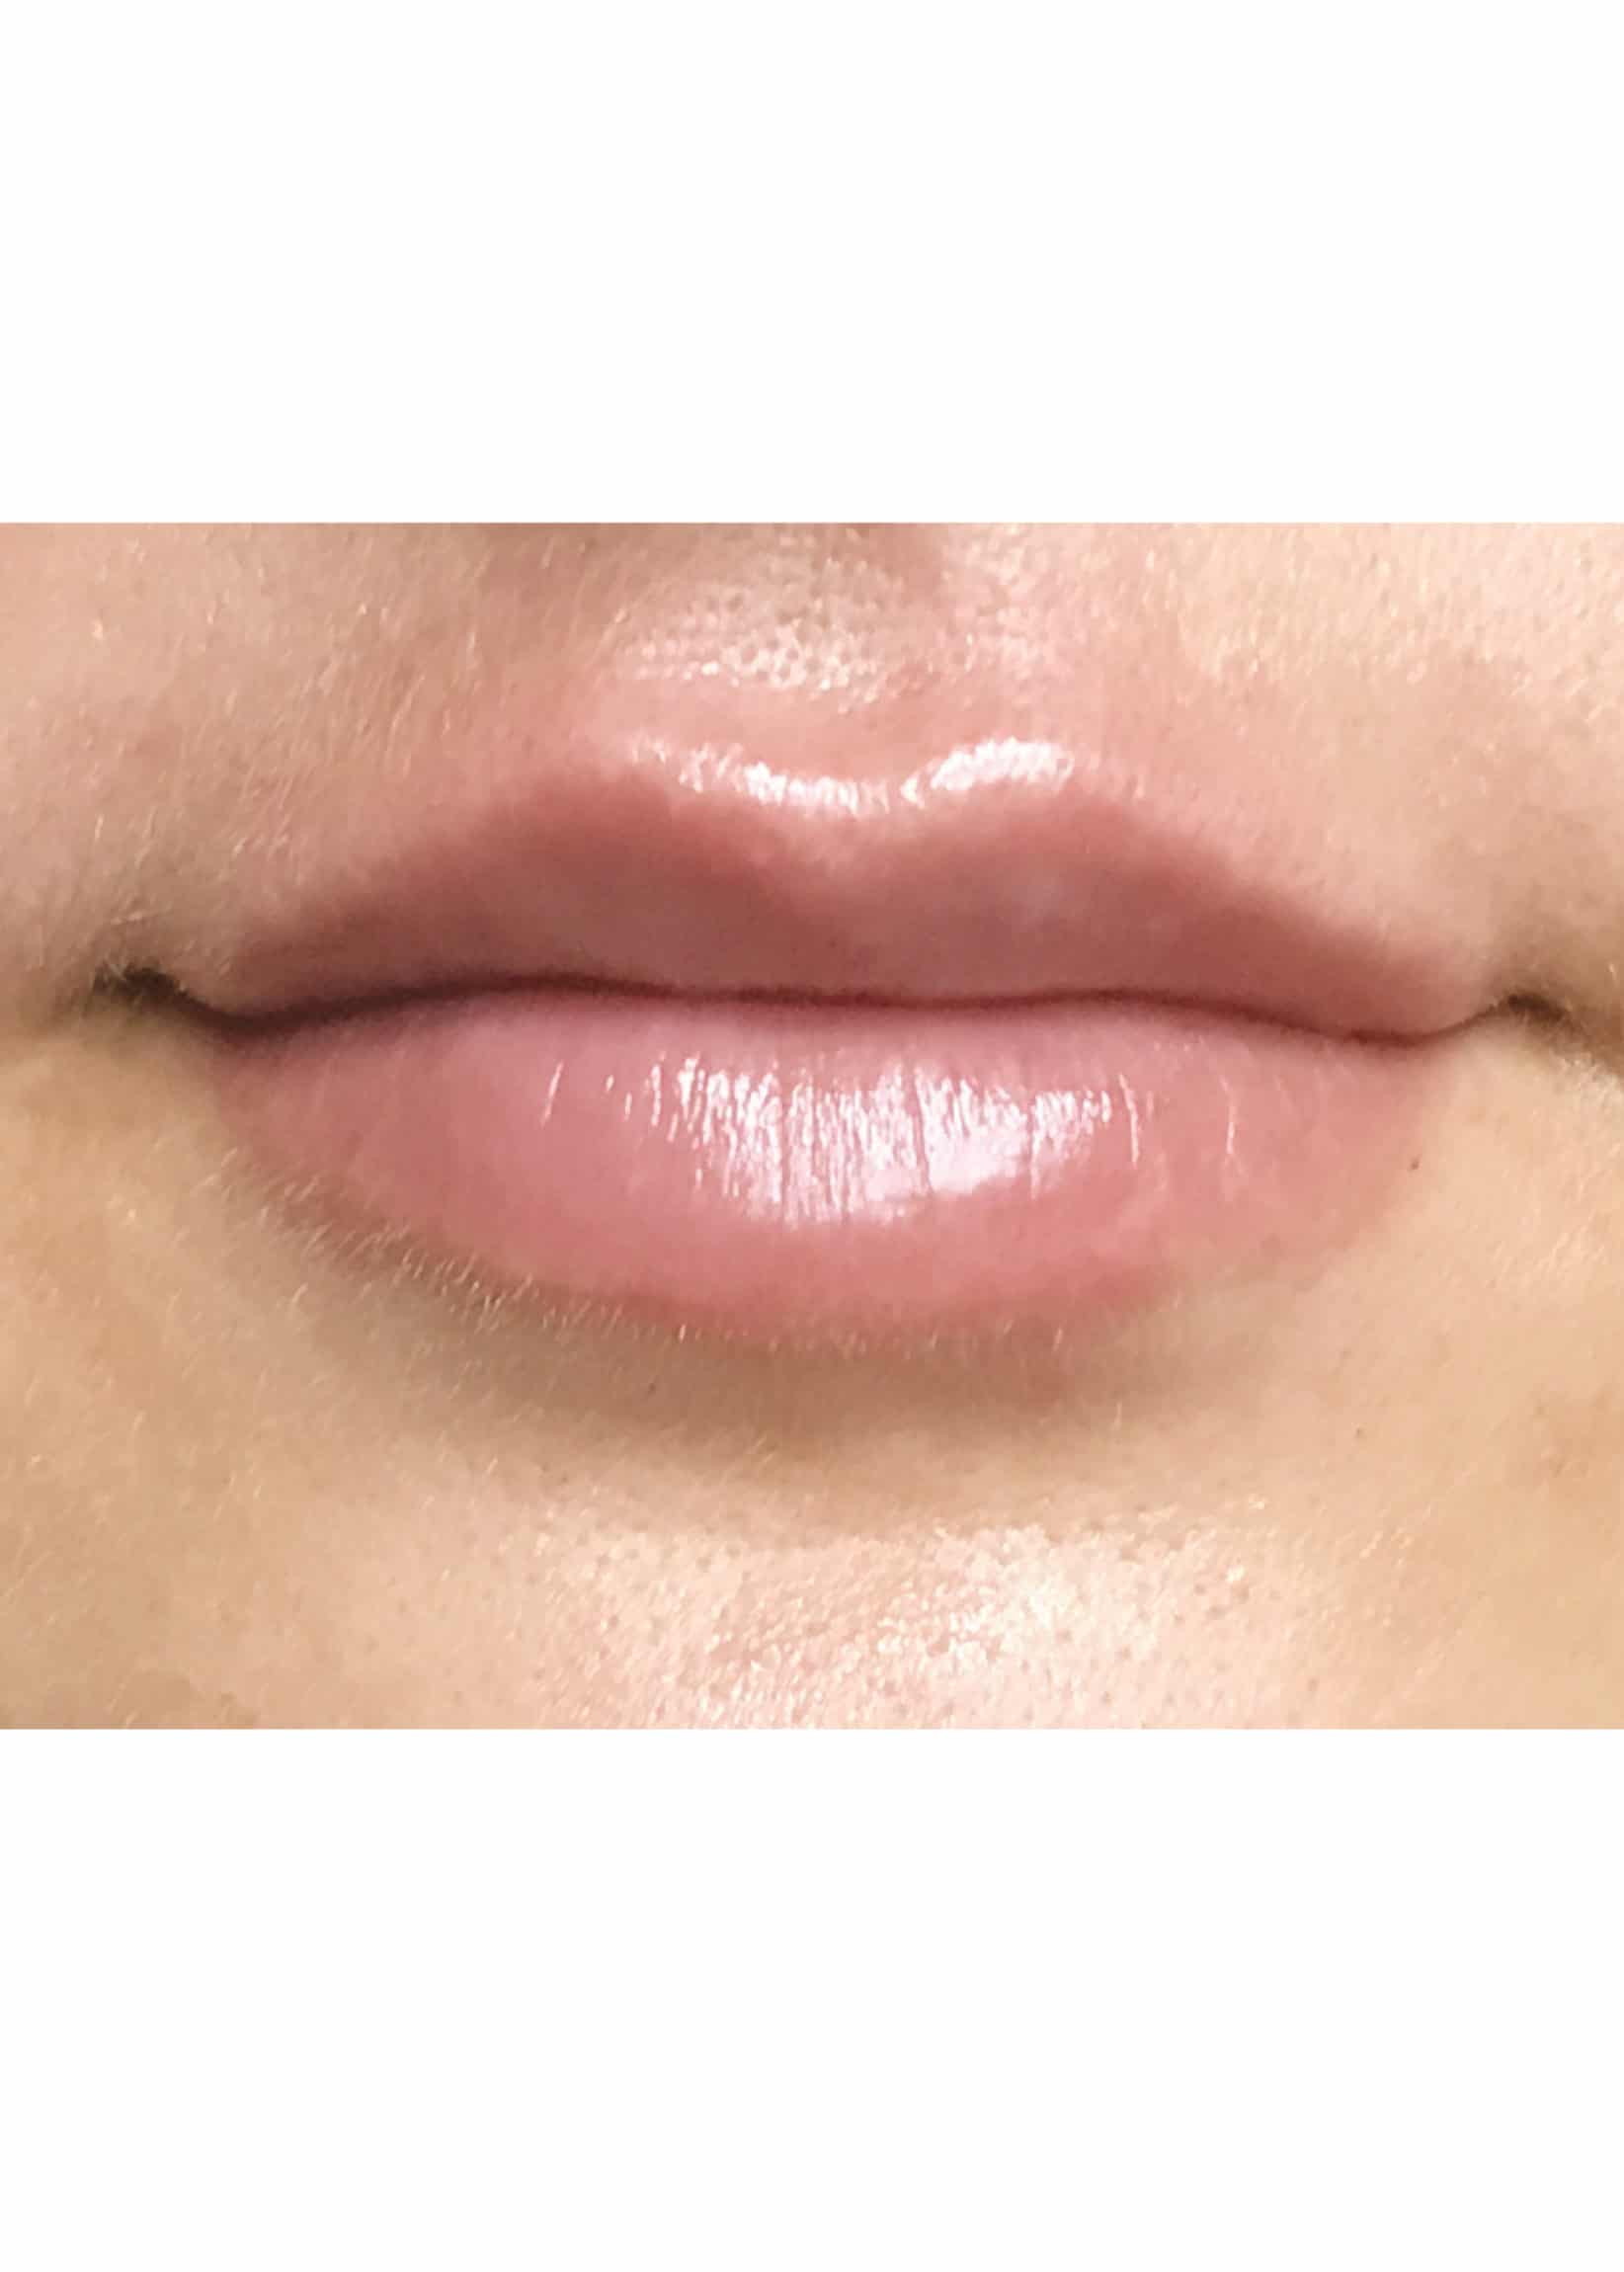 TheSkinCenter ProviderPages TiffaneyBeddow LipFiller After 5 scaled 1